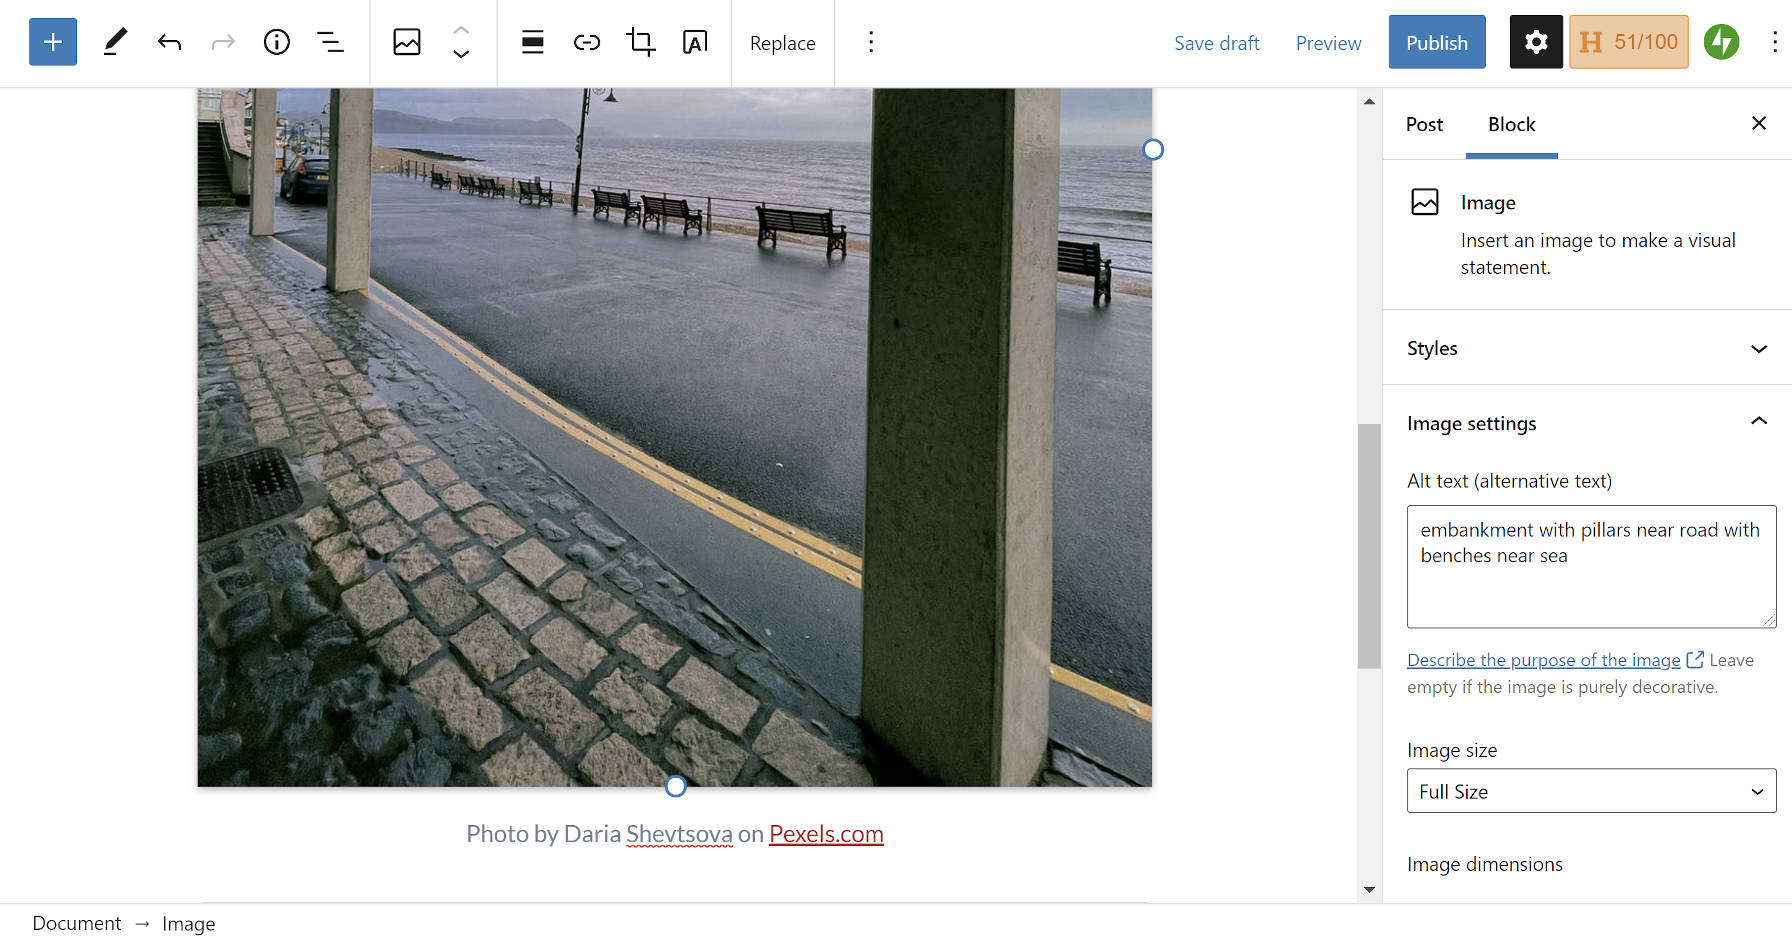 Screenshot of inserting an image via Jetpack's Pexels integration with pre-filled photo credits and alt text.